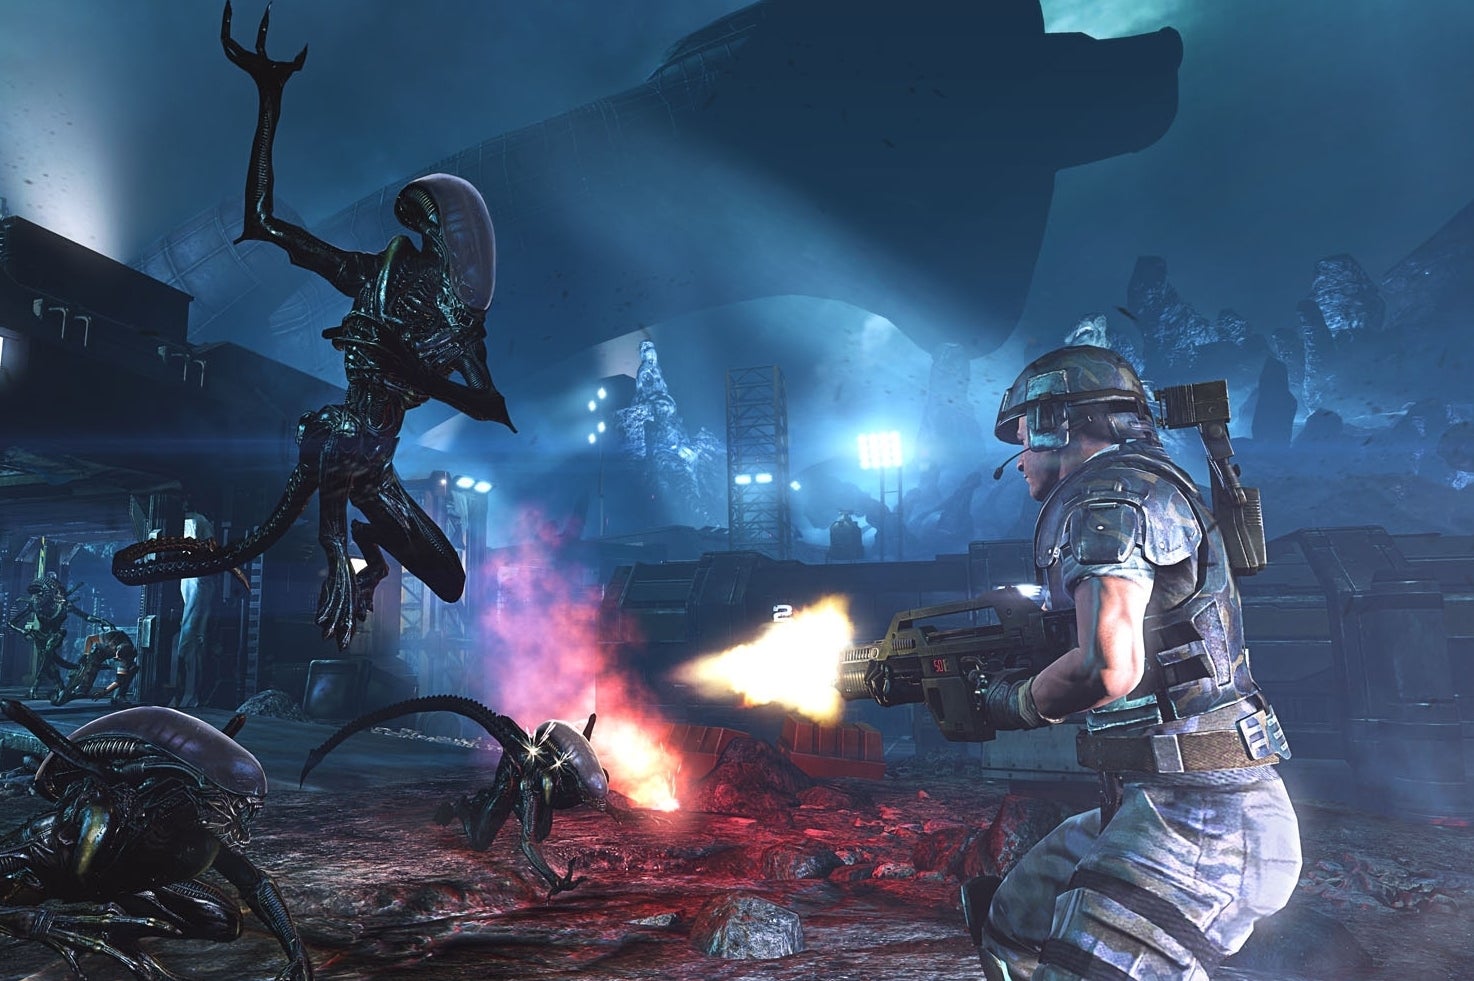 Image for Aliens: Colonial Marines co-developer TimeGate Studios has been shuttered - report